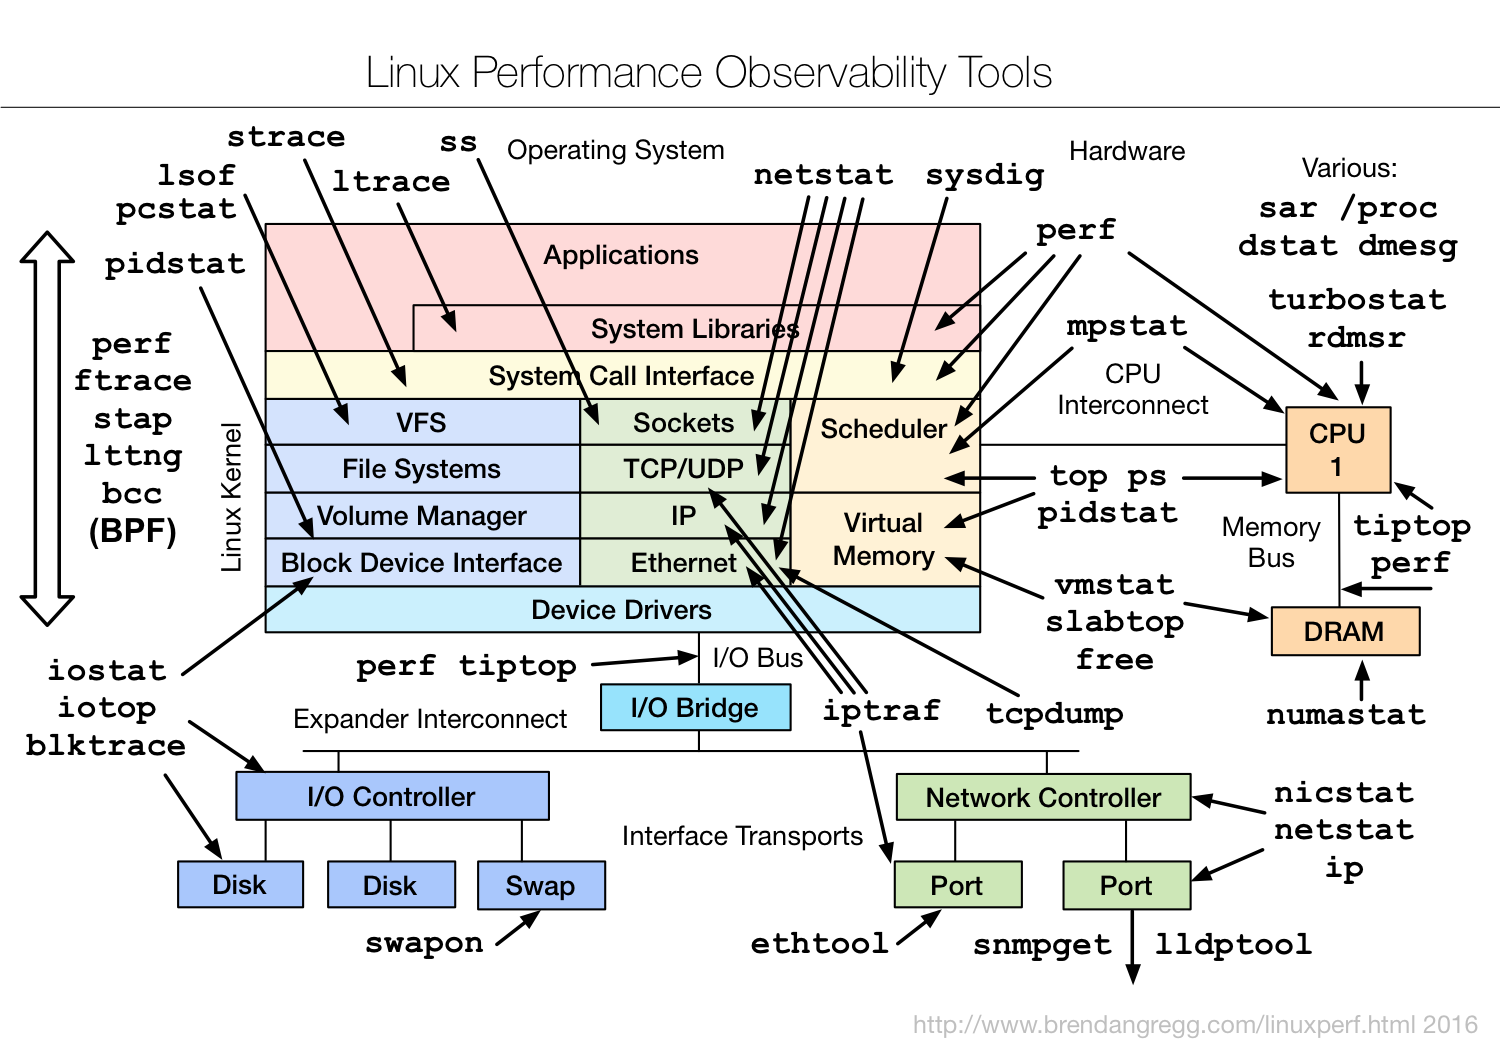 linux_observability_tools.png